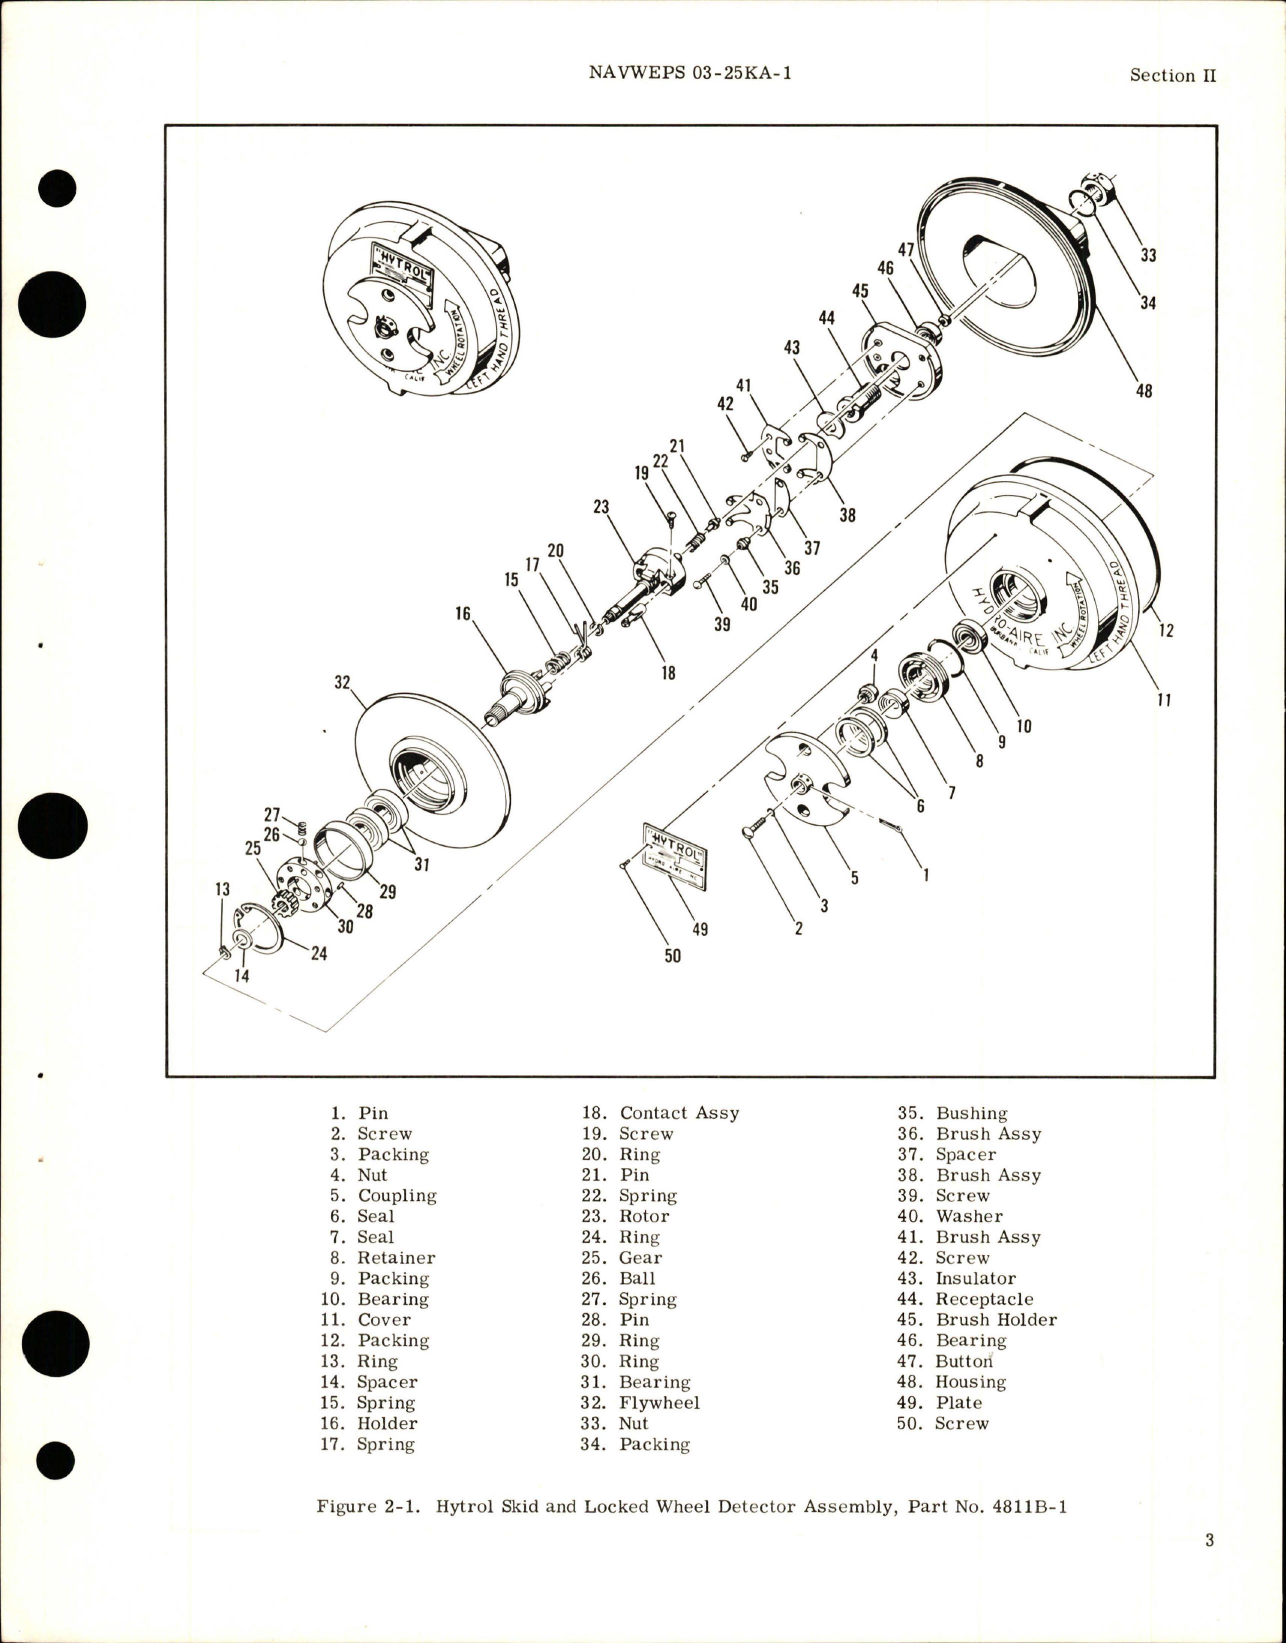 Sample page 7 from AirCorps Library document: Overhaul Instructions for Hytrol Skid and Locked Wheel Detector Assembly - Parts 4811B-1 and 4811B-2 